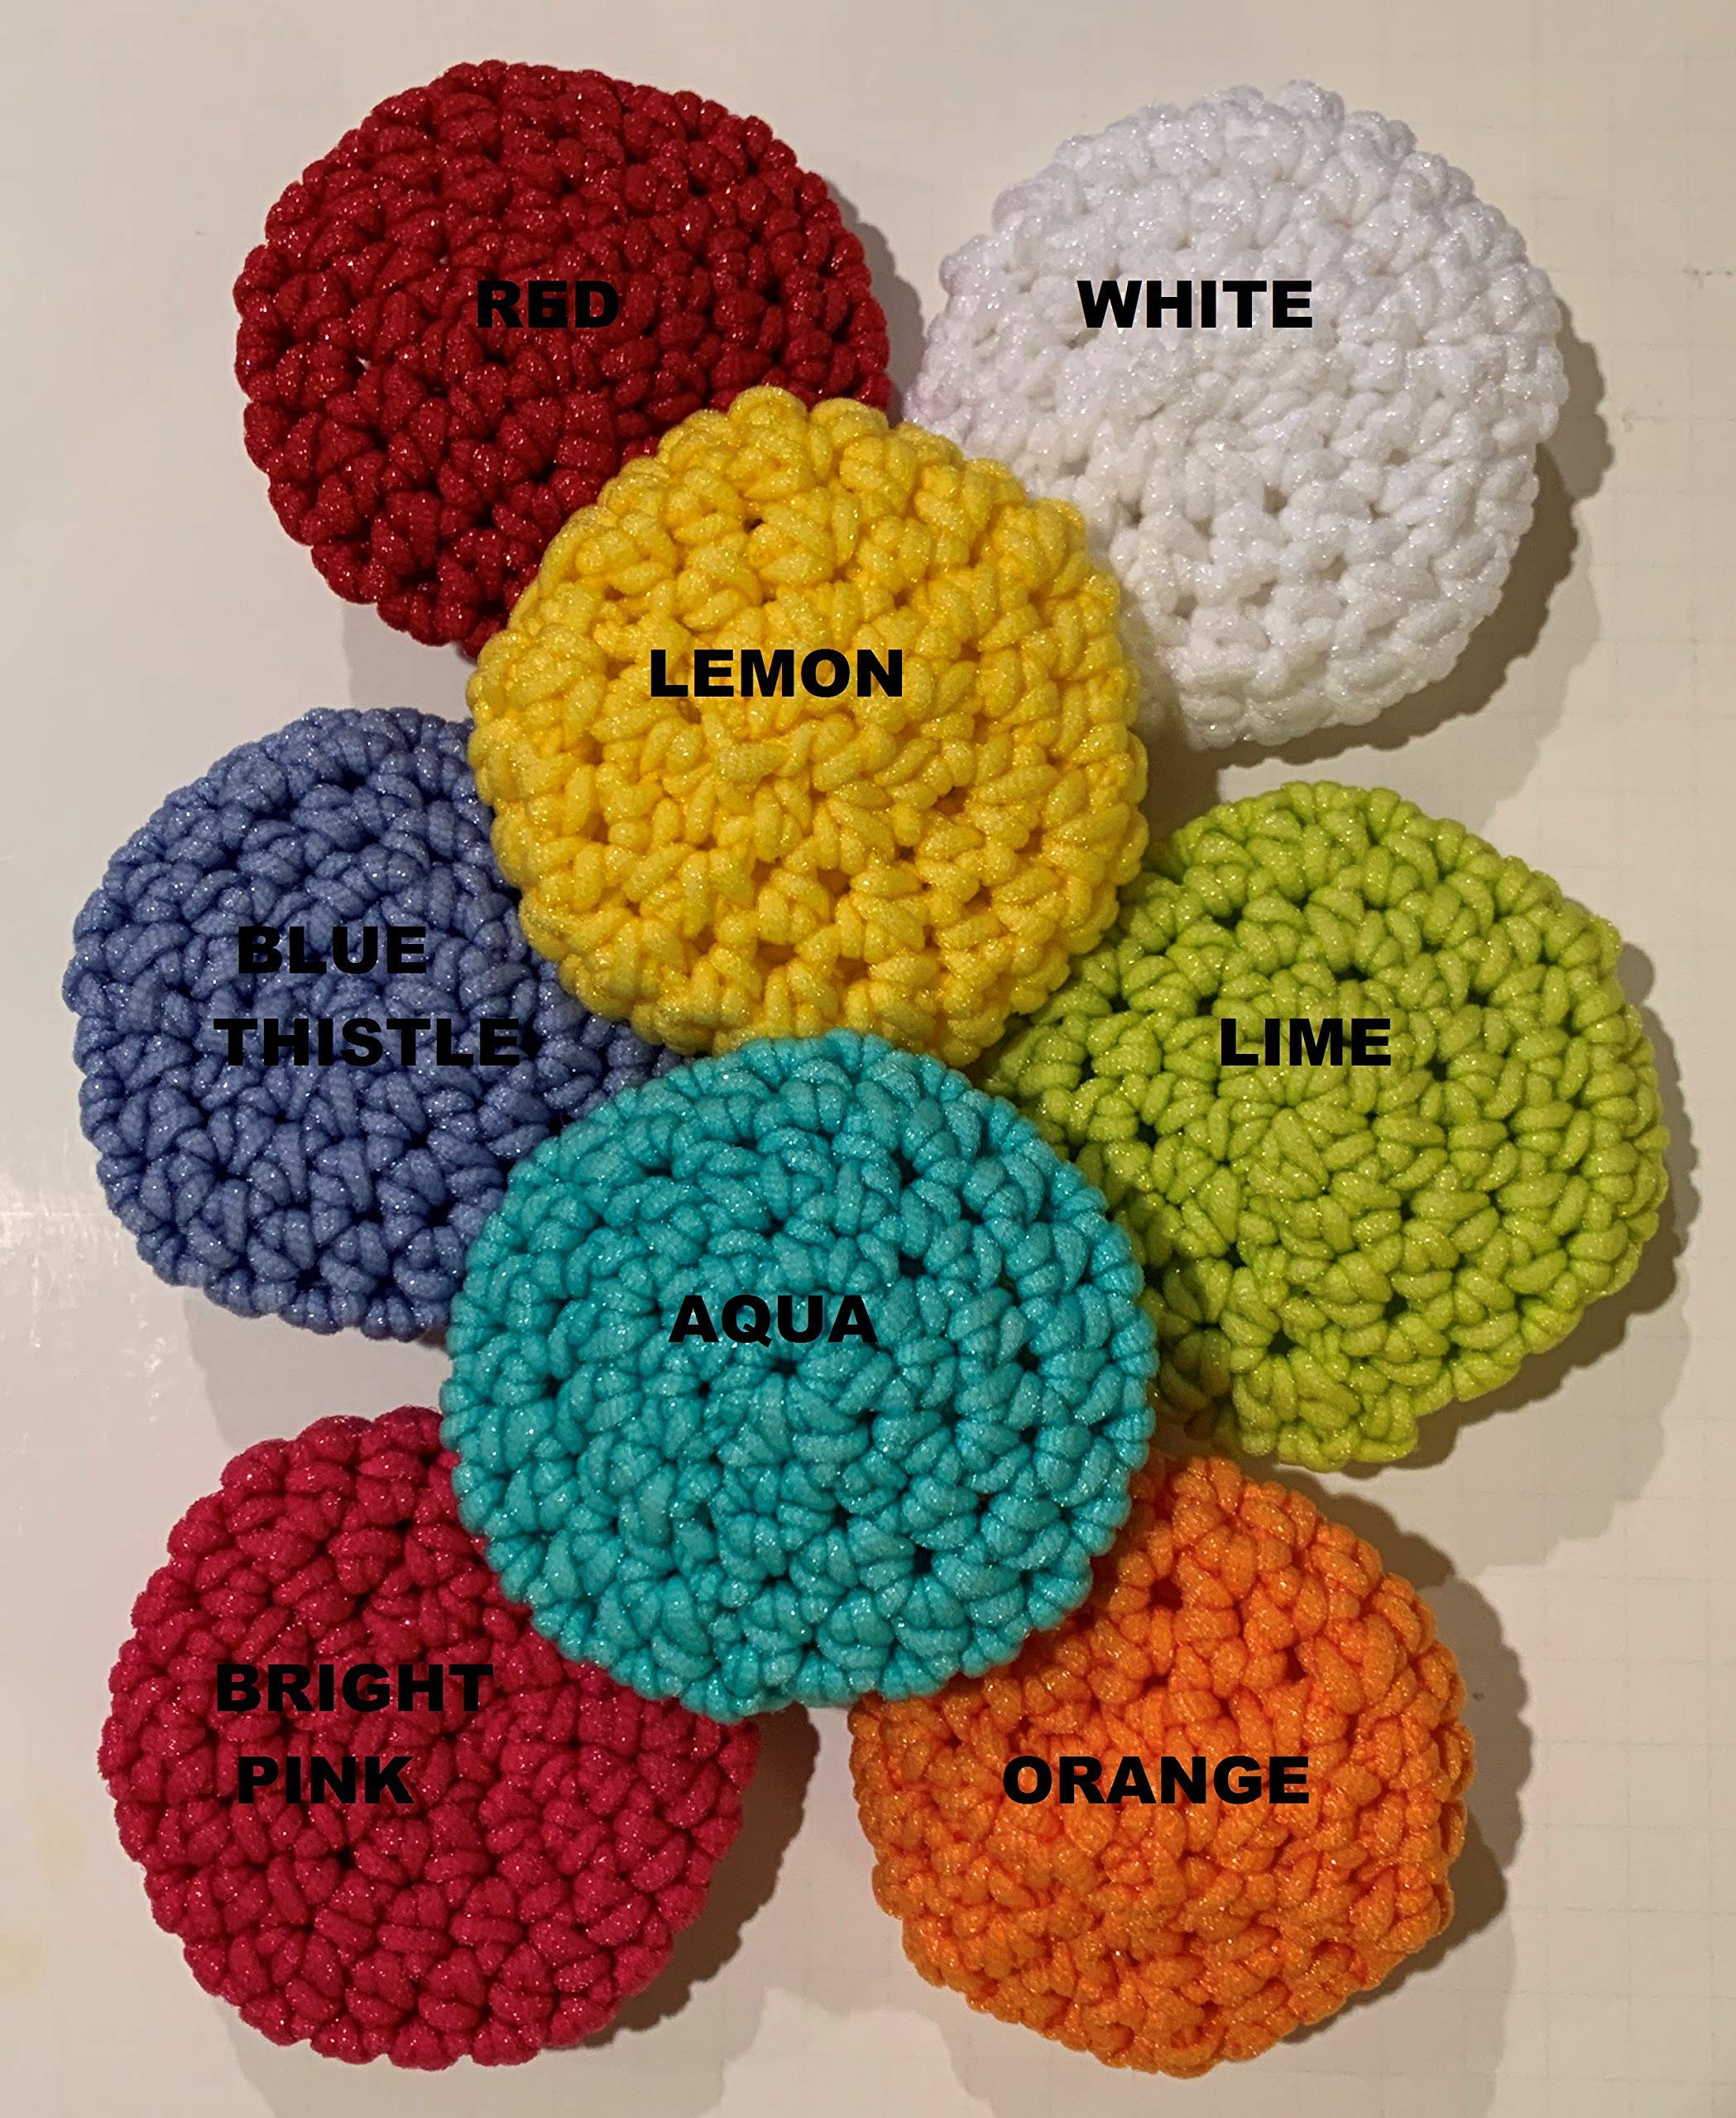 Handmade Nylon Kitchen Scrubbers - Pot Scrubbers - Bulk Buy Pack of 10 - Sponge - Scouring Pad - Reusable - Scrubbies - double thickness - large scrubber